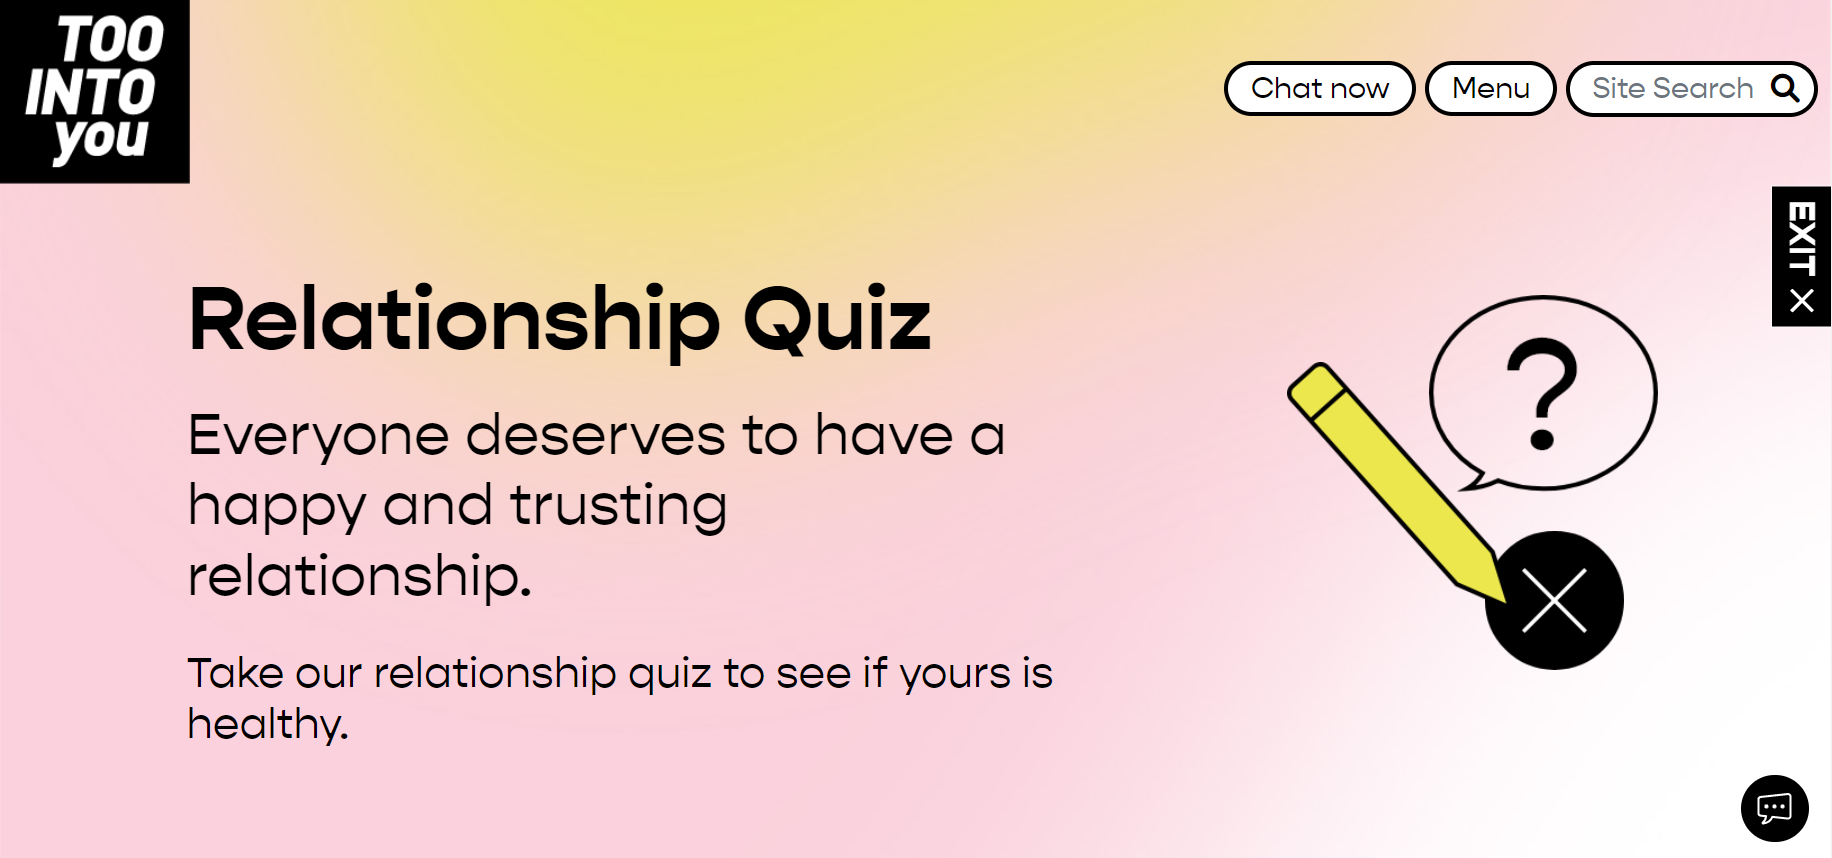 Relationship quiz - Too Into You